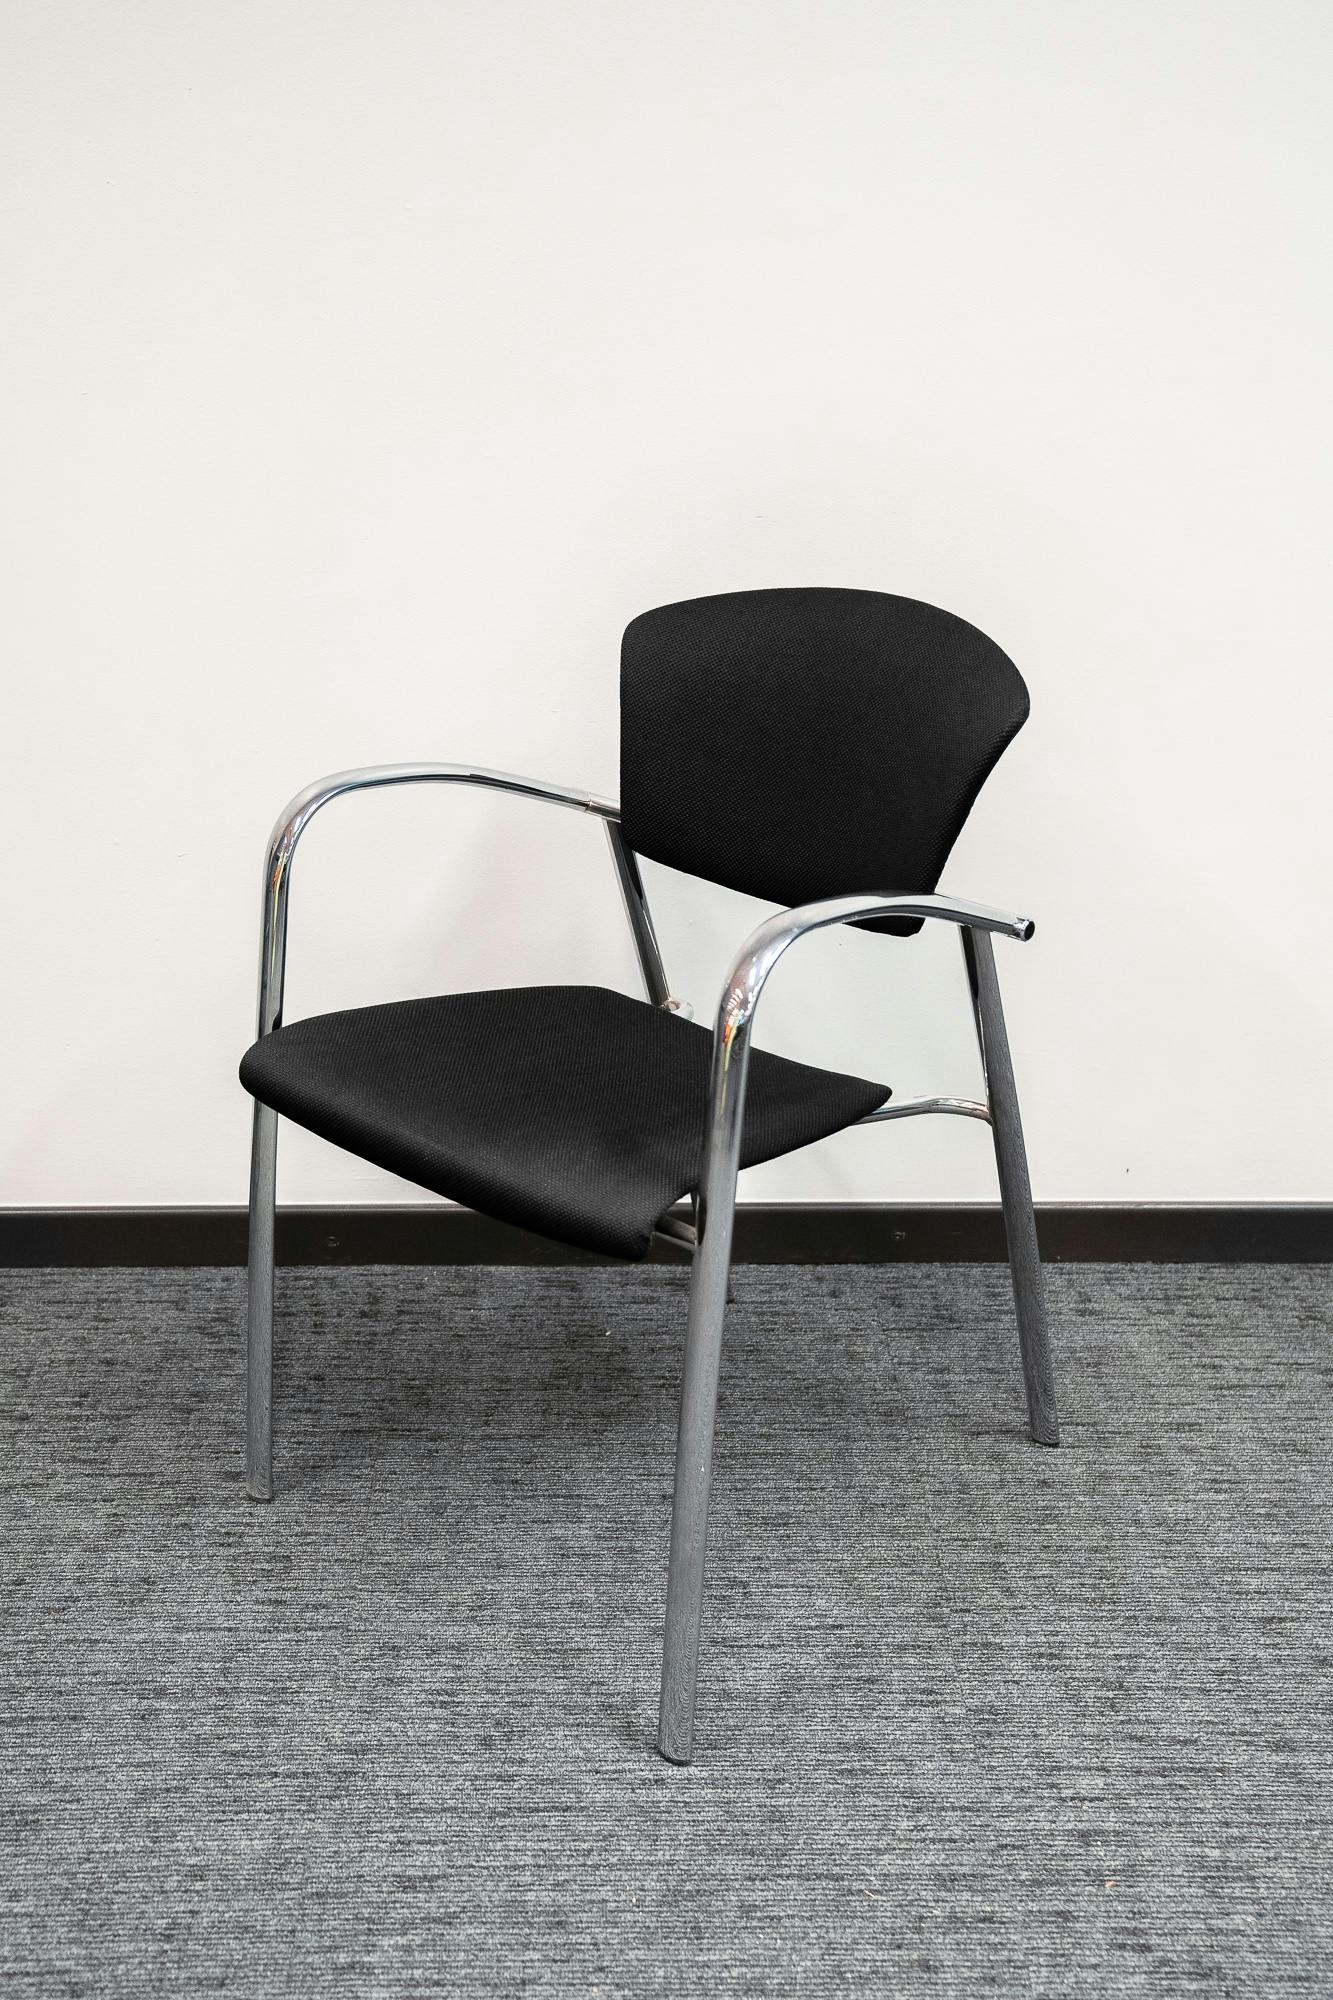 Black and aluminum designer chair - Second hand quality "Chairs" - Relieve Furniture